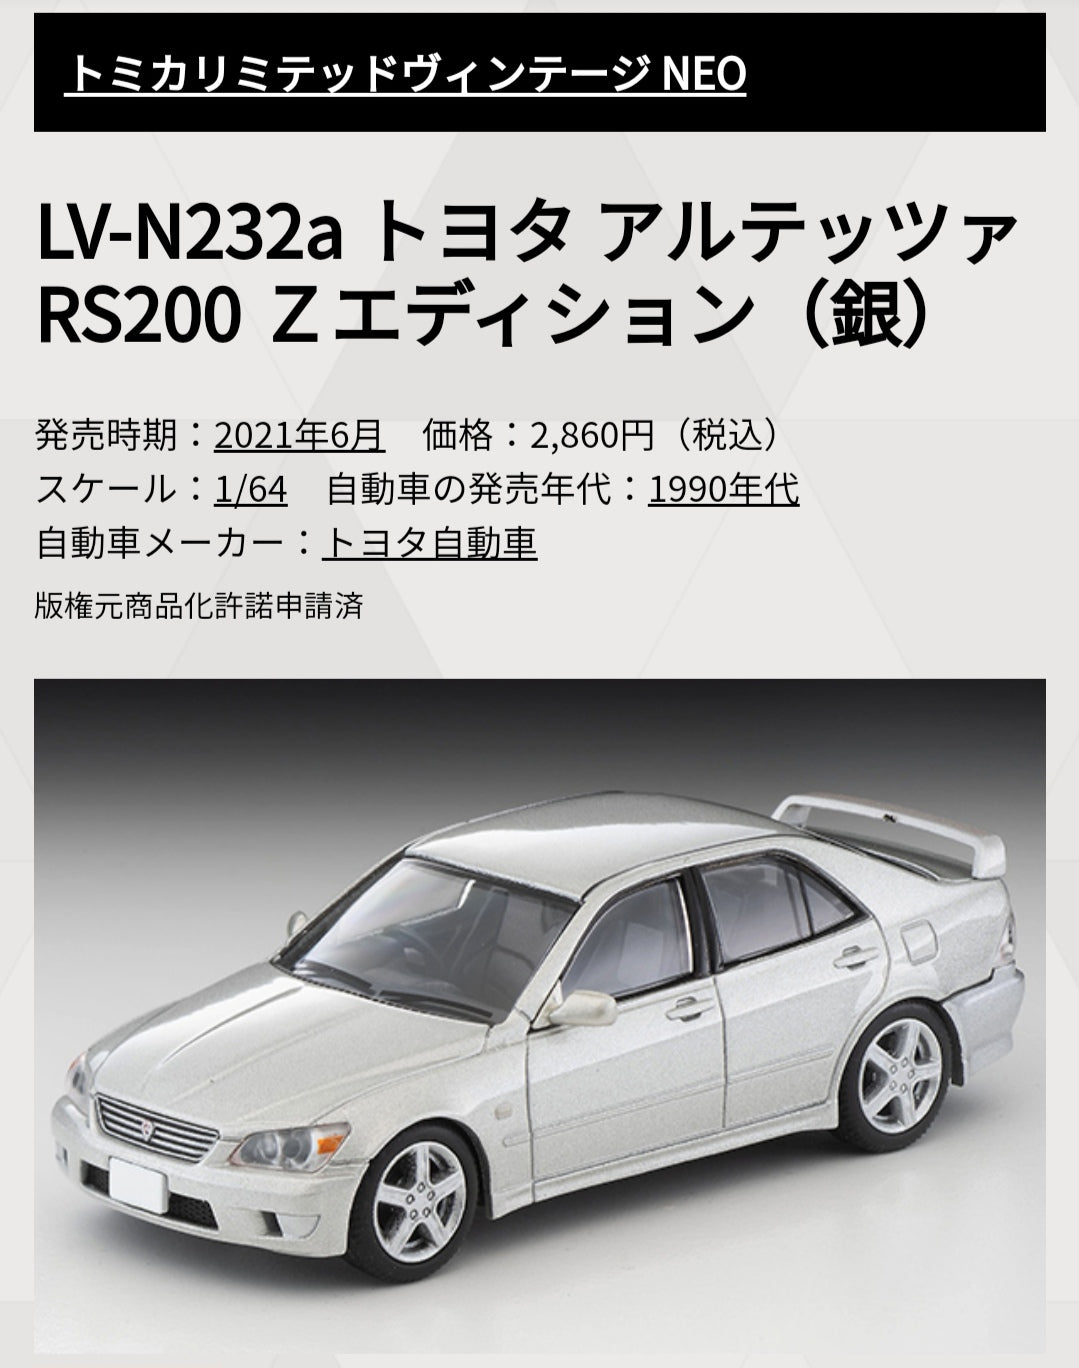 Tomica Limited Vintage Neo LV-N232a Toyota Altezza RS200 Z Edition Silver Takara Tomy